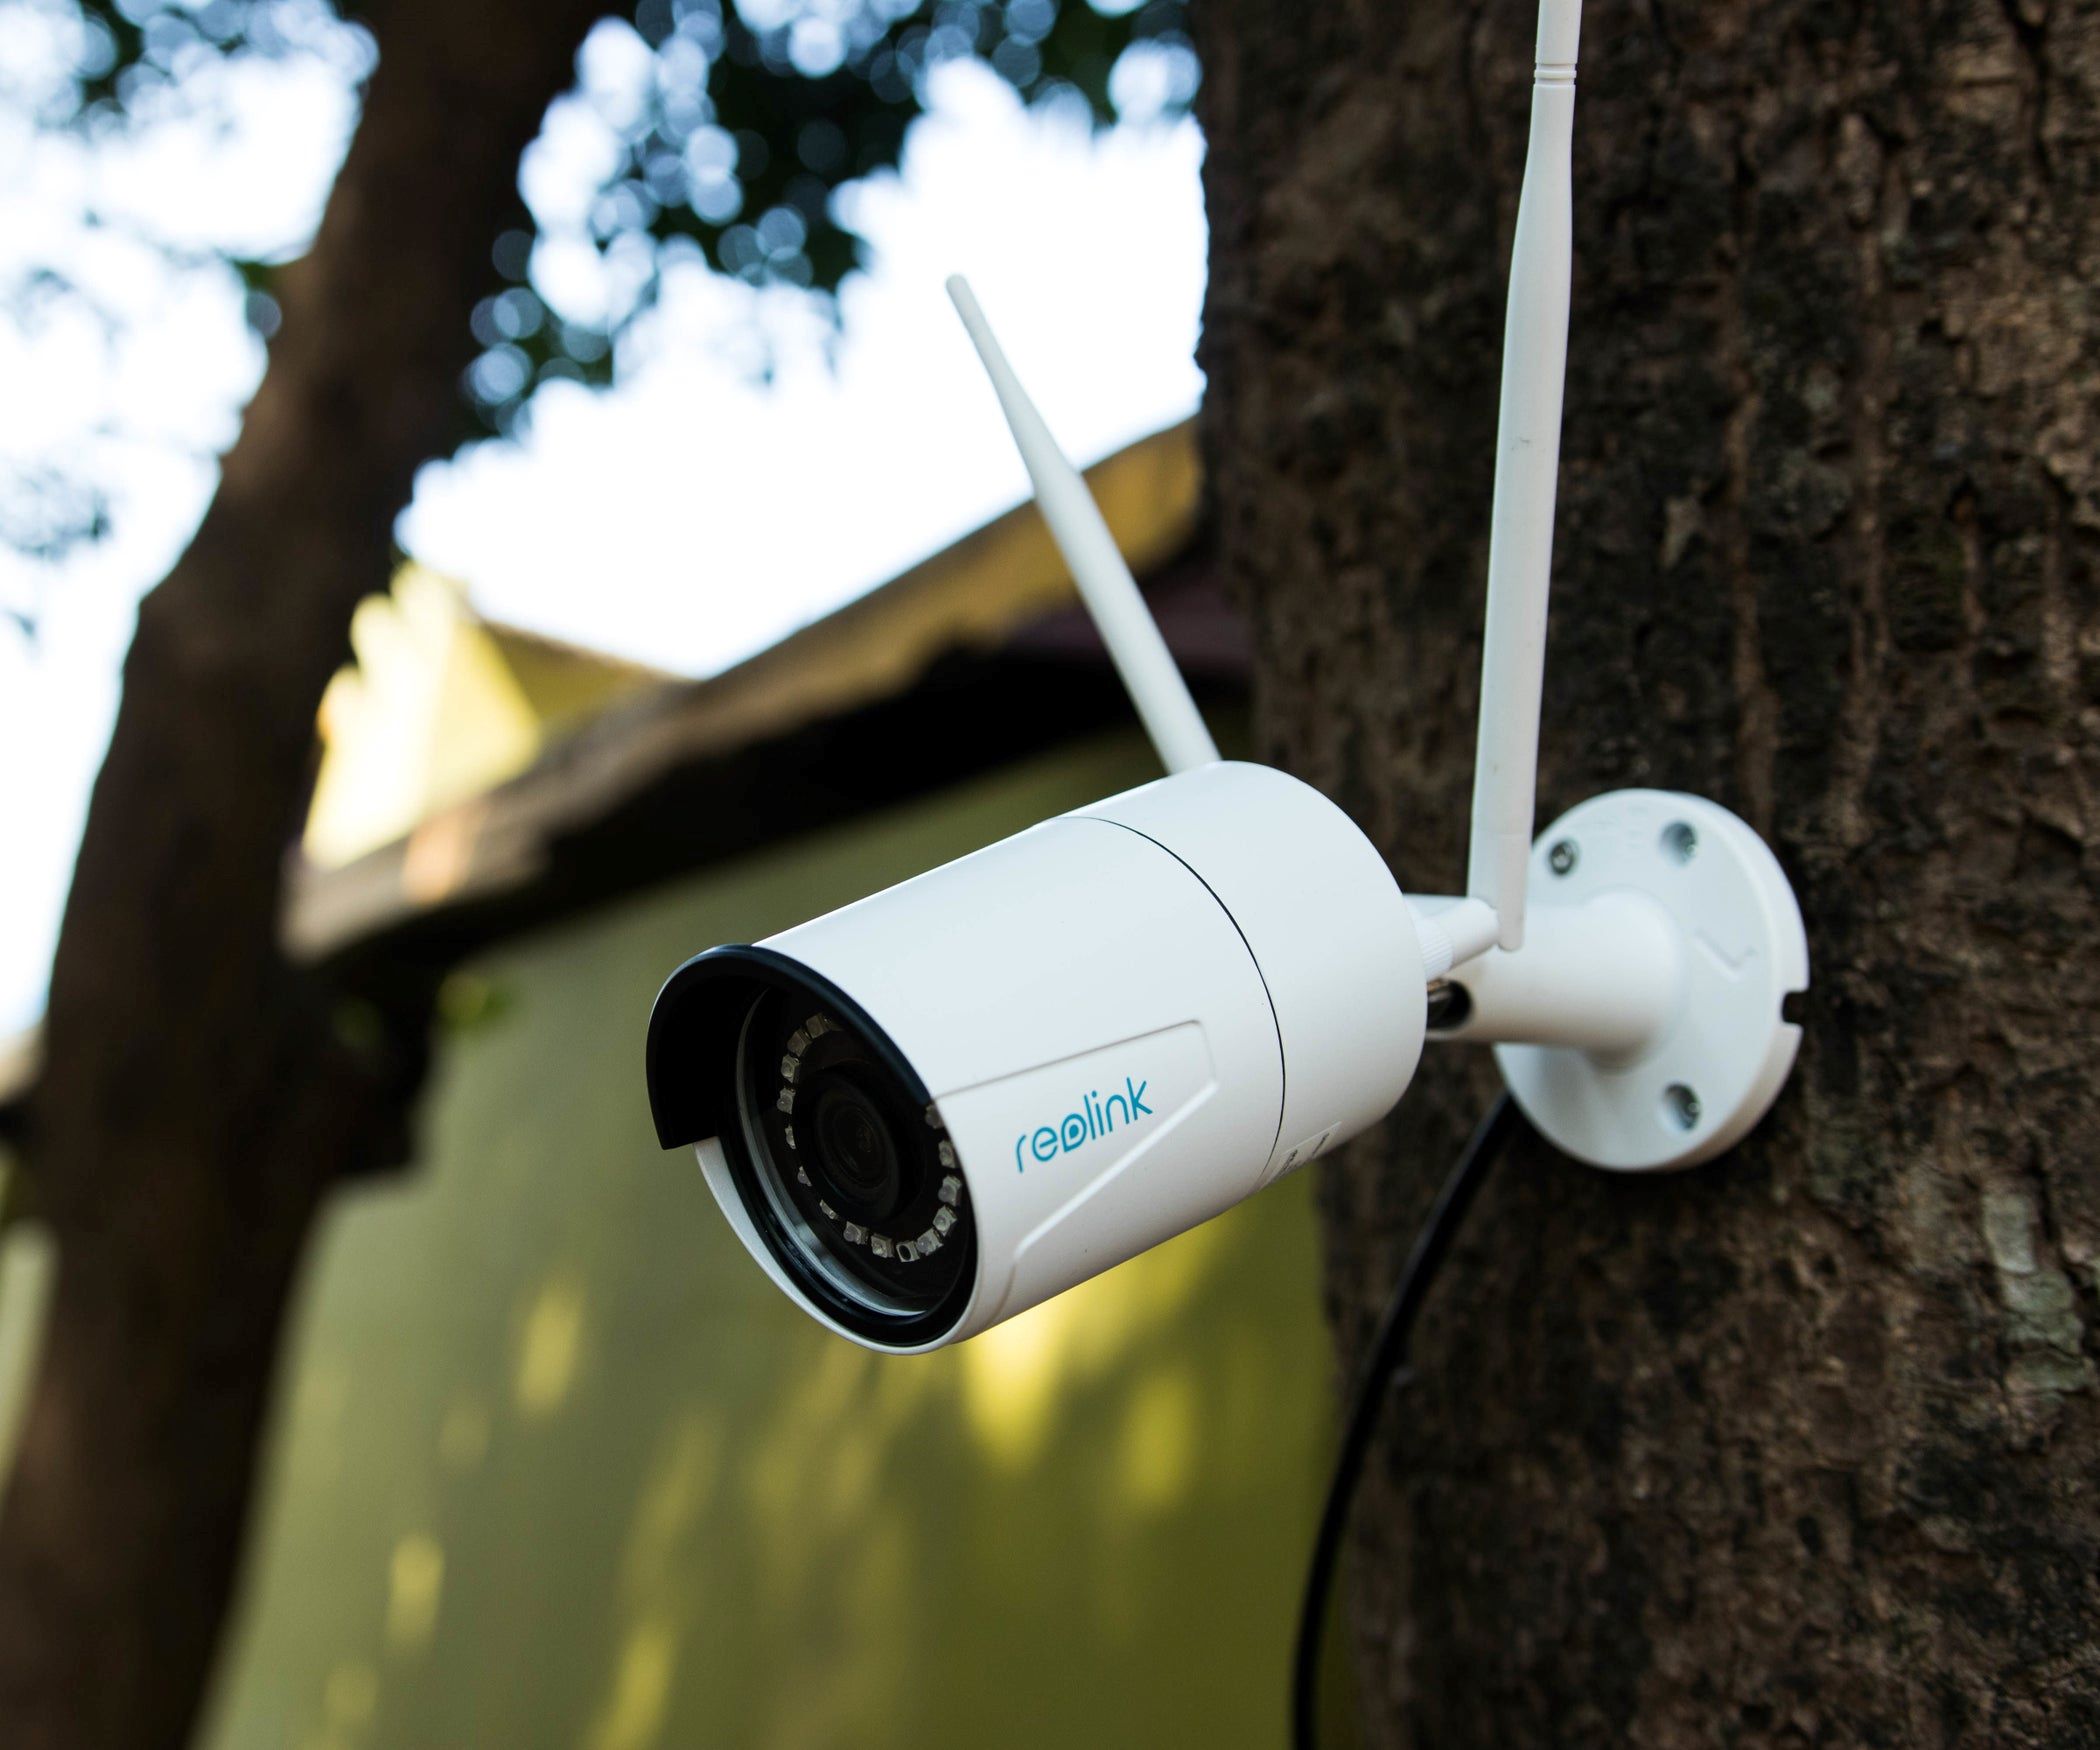 How To Have An Outdoor Camera With Long-Range Wi-Fi In Trees